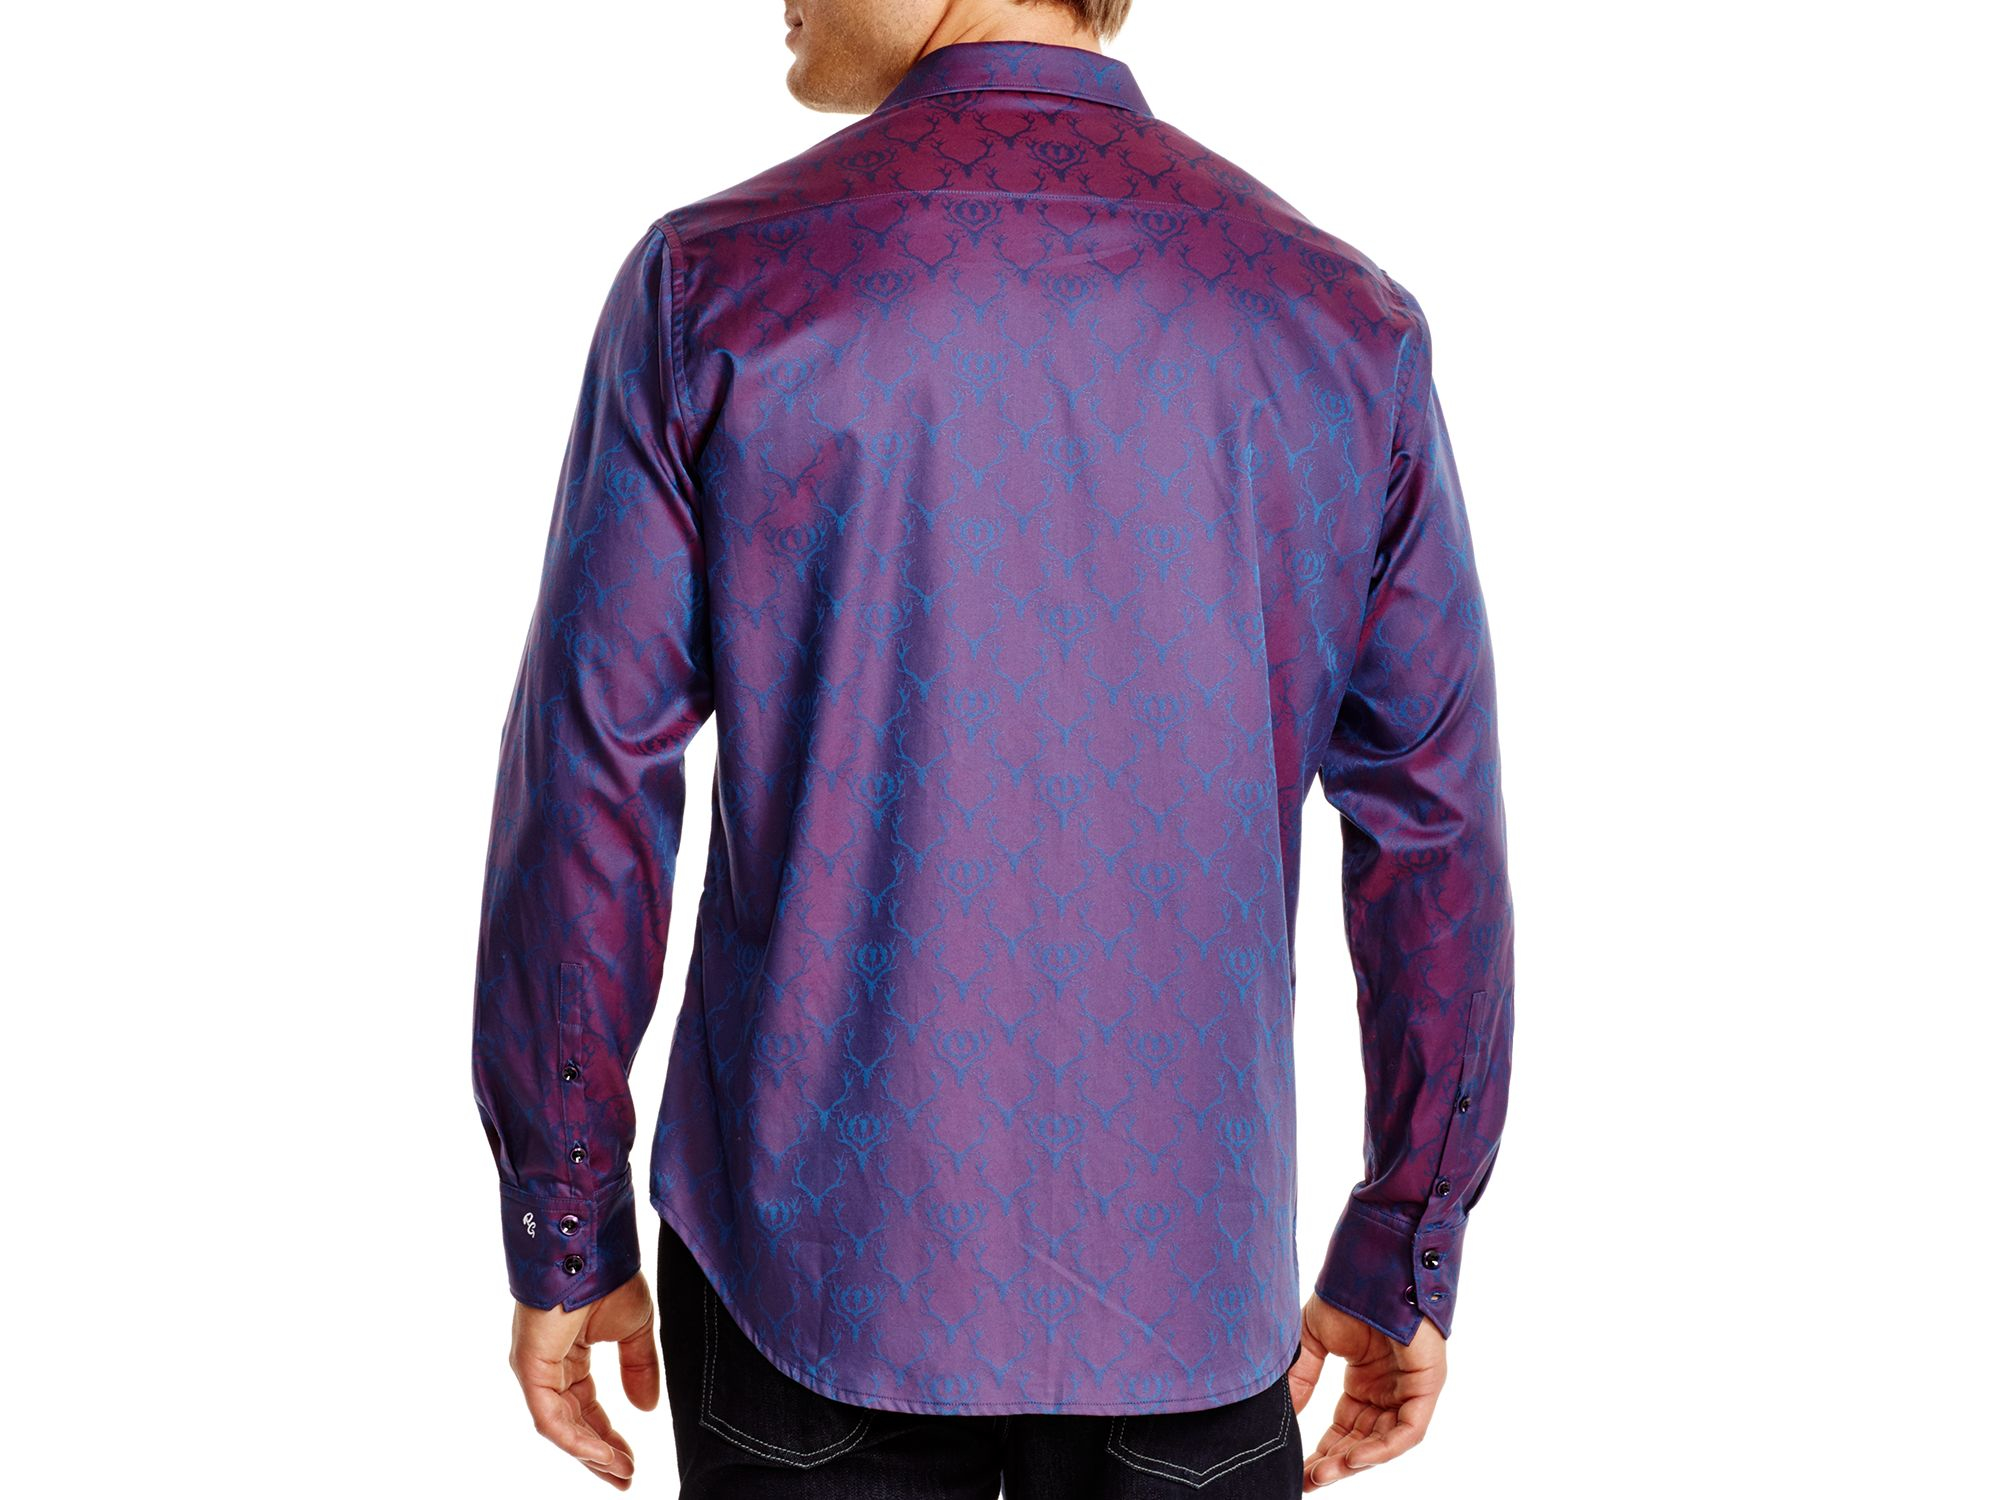 Lyst - Robert Graham Thistle Classic Fit Button Down Shirt in Purple